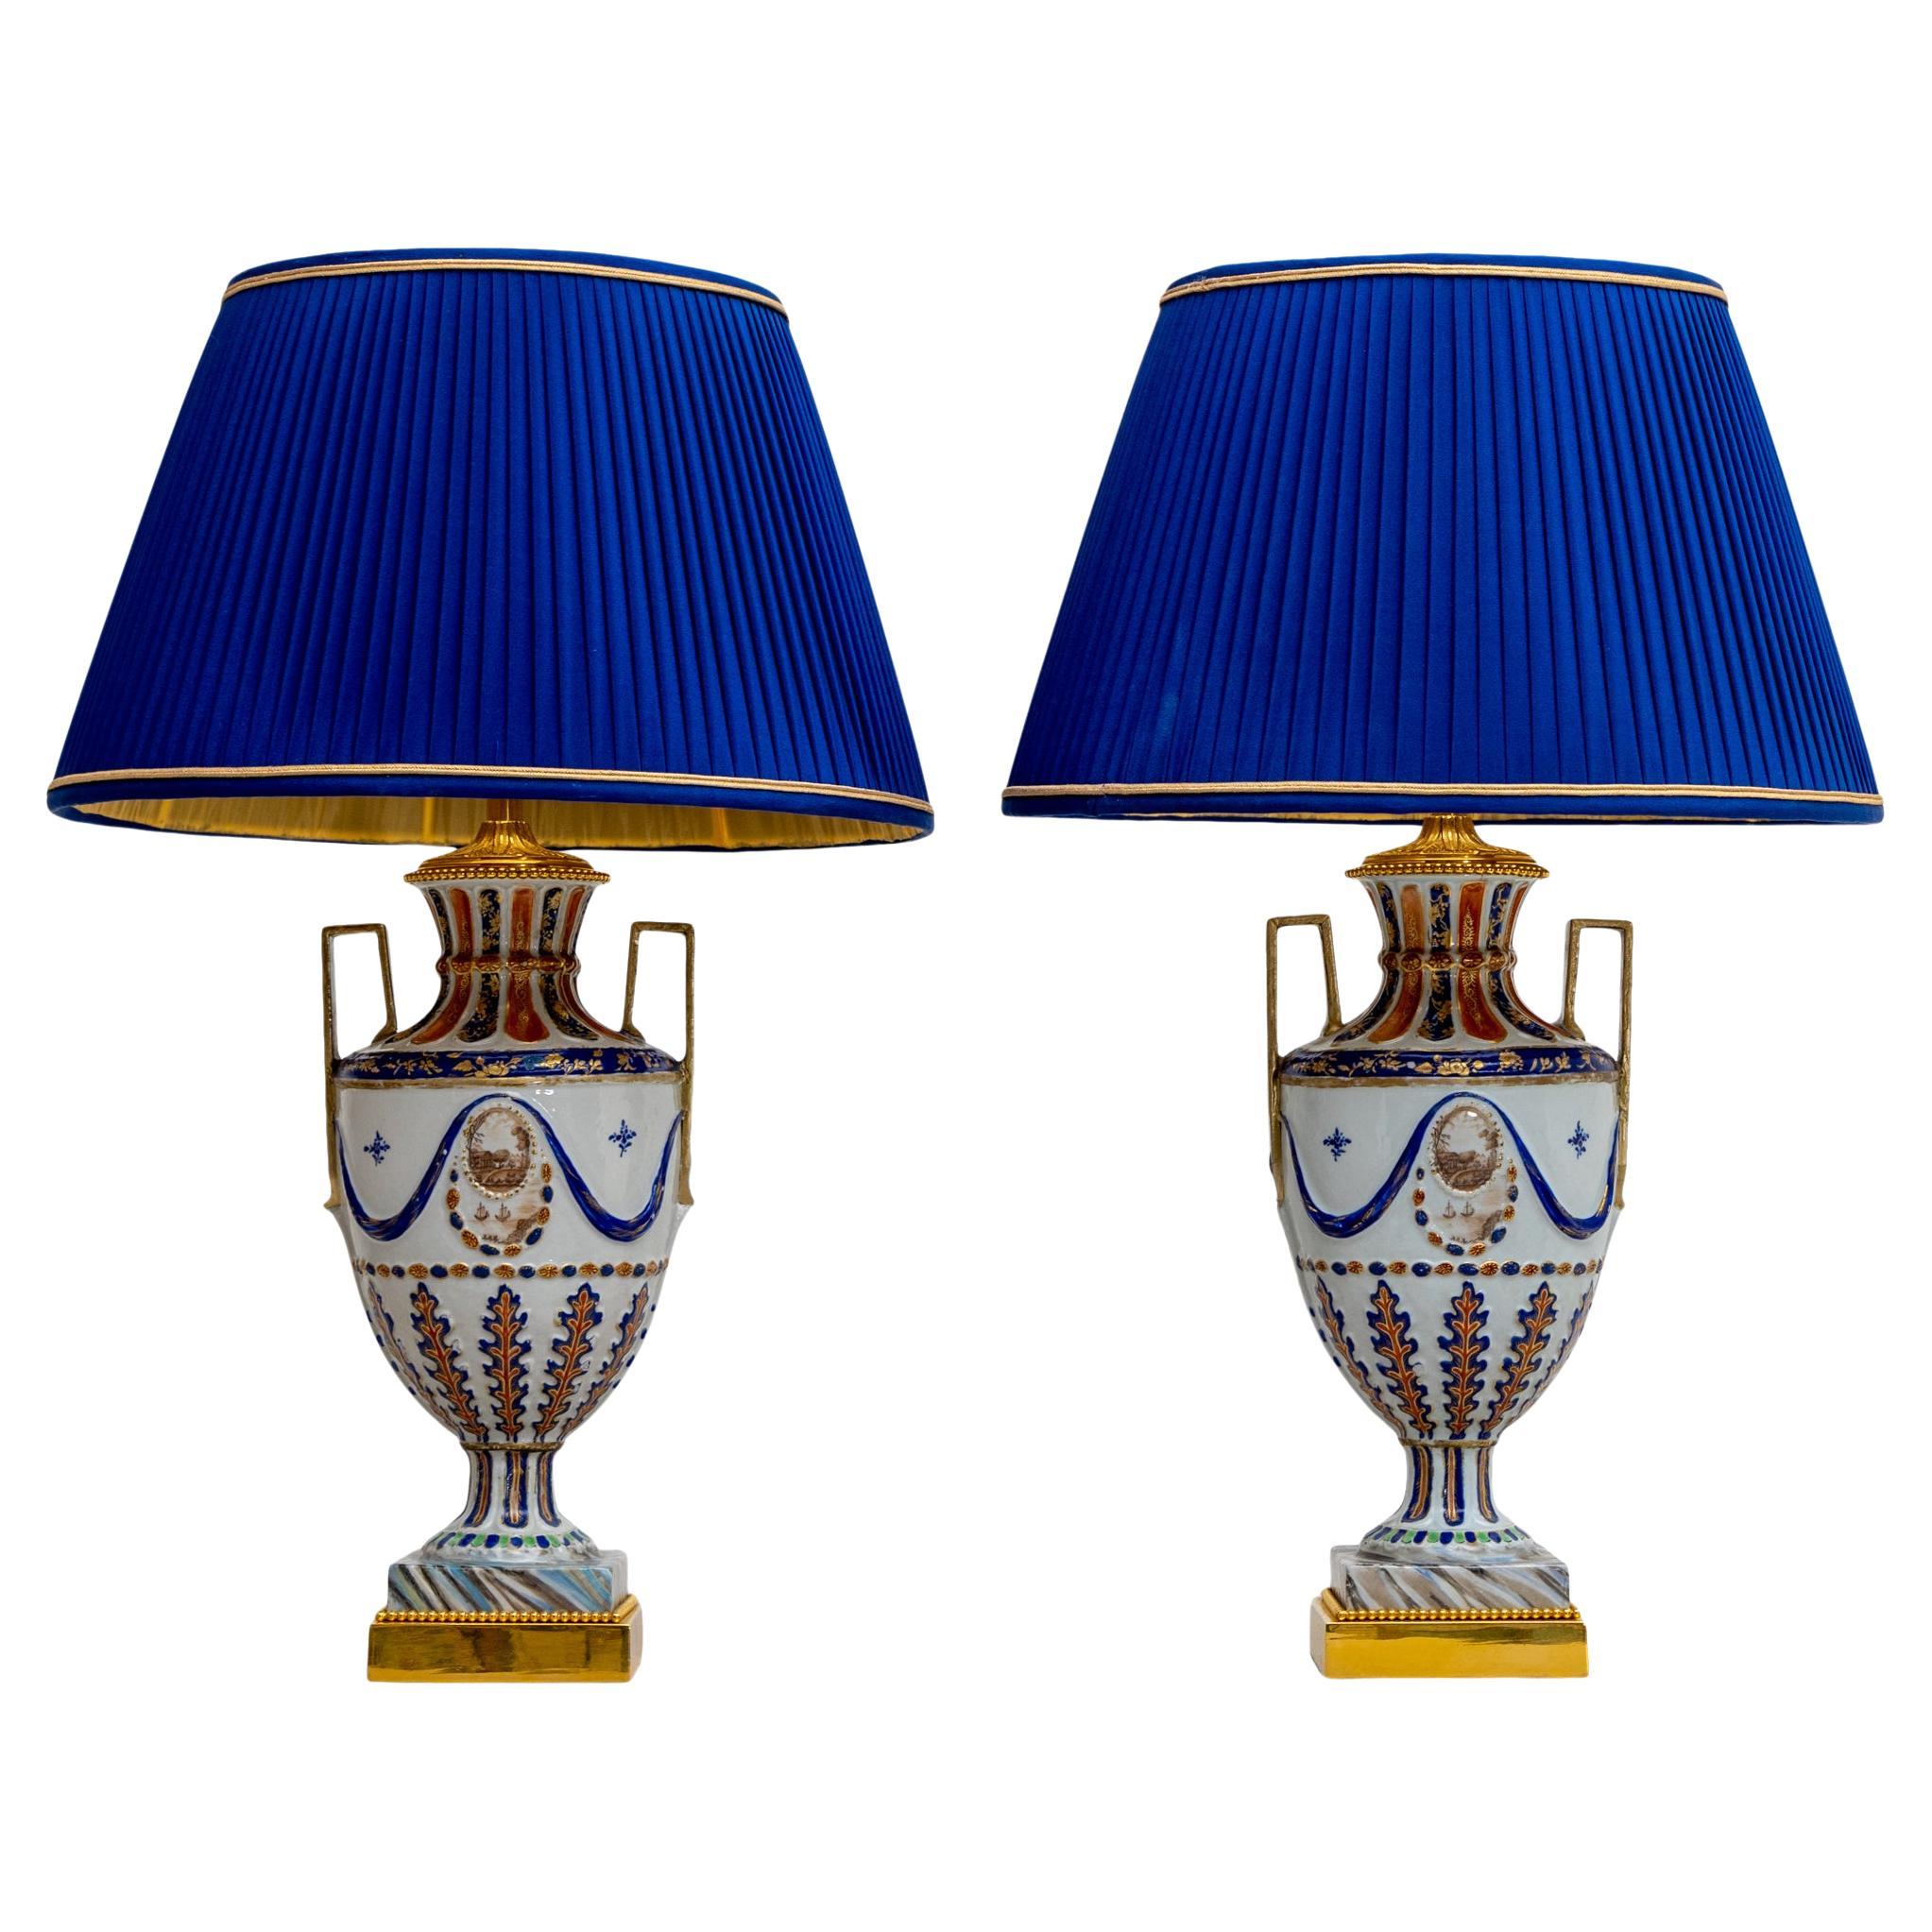 Table Lamps with Porcelain Bases, Chinese Export, 1st Half 19th Century